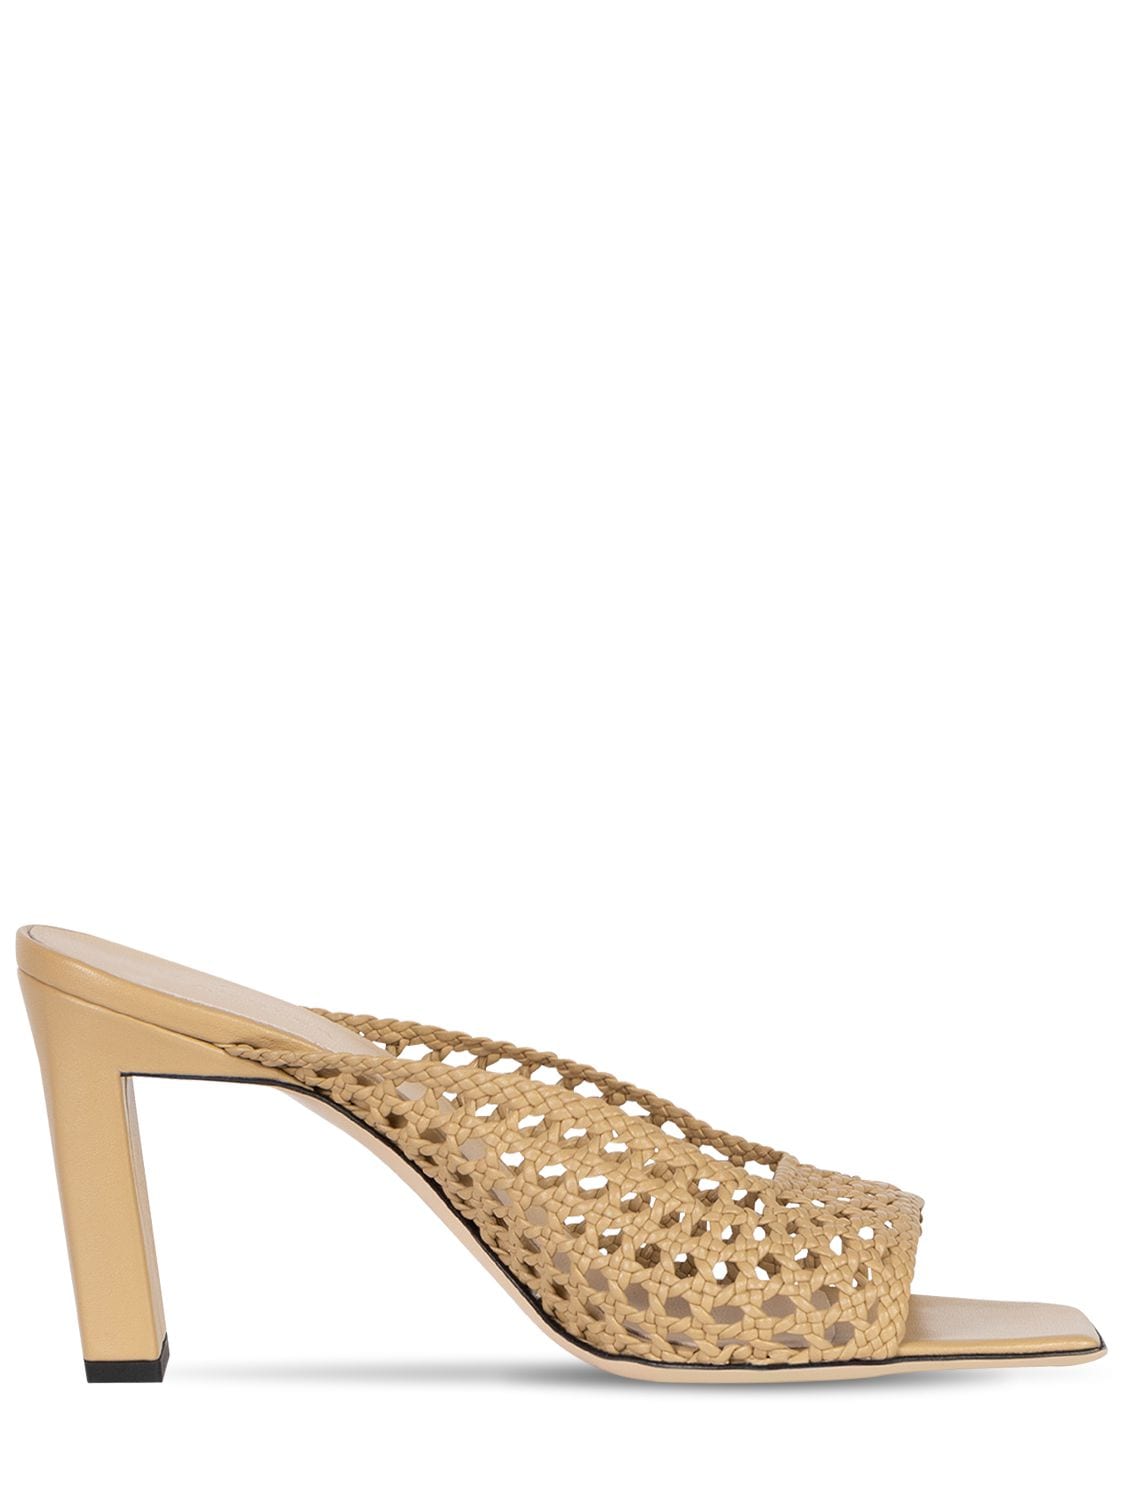 Wandler Isa Woven Leather Slide Sandals In Nude